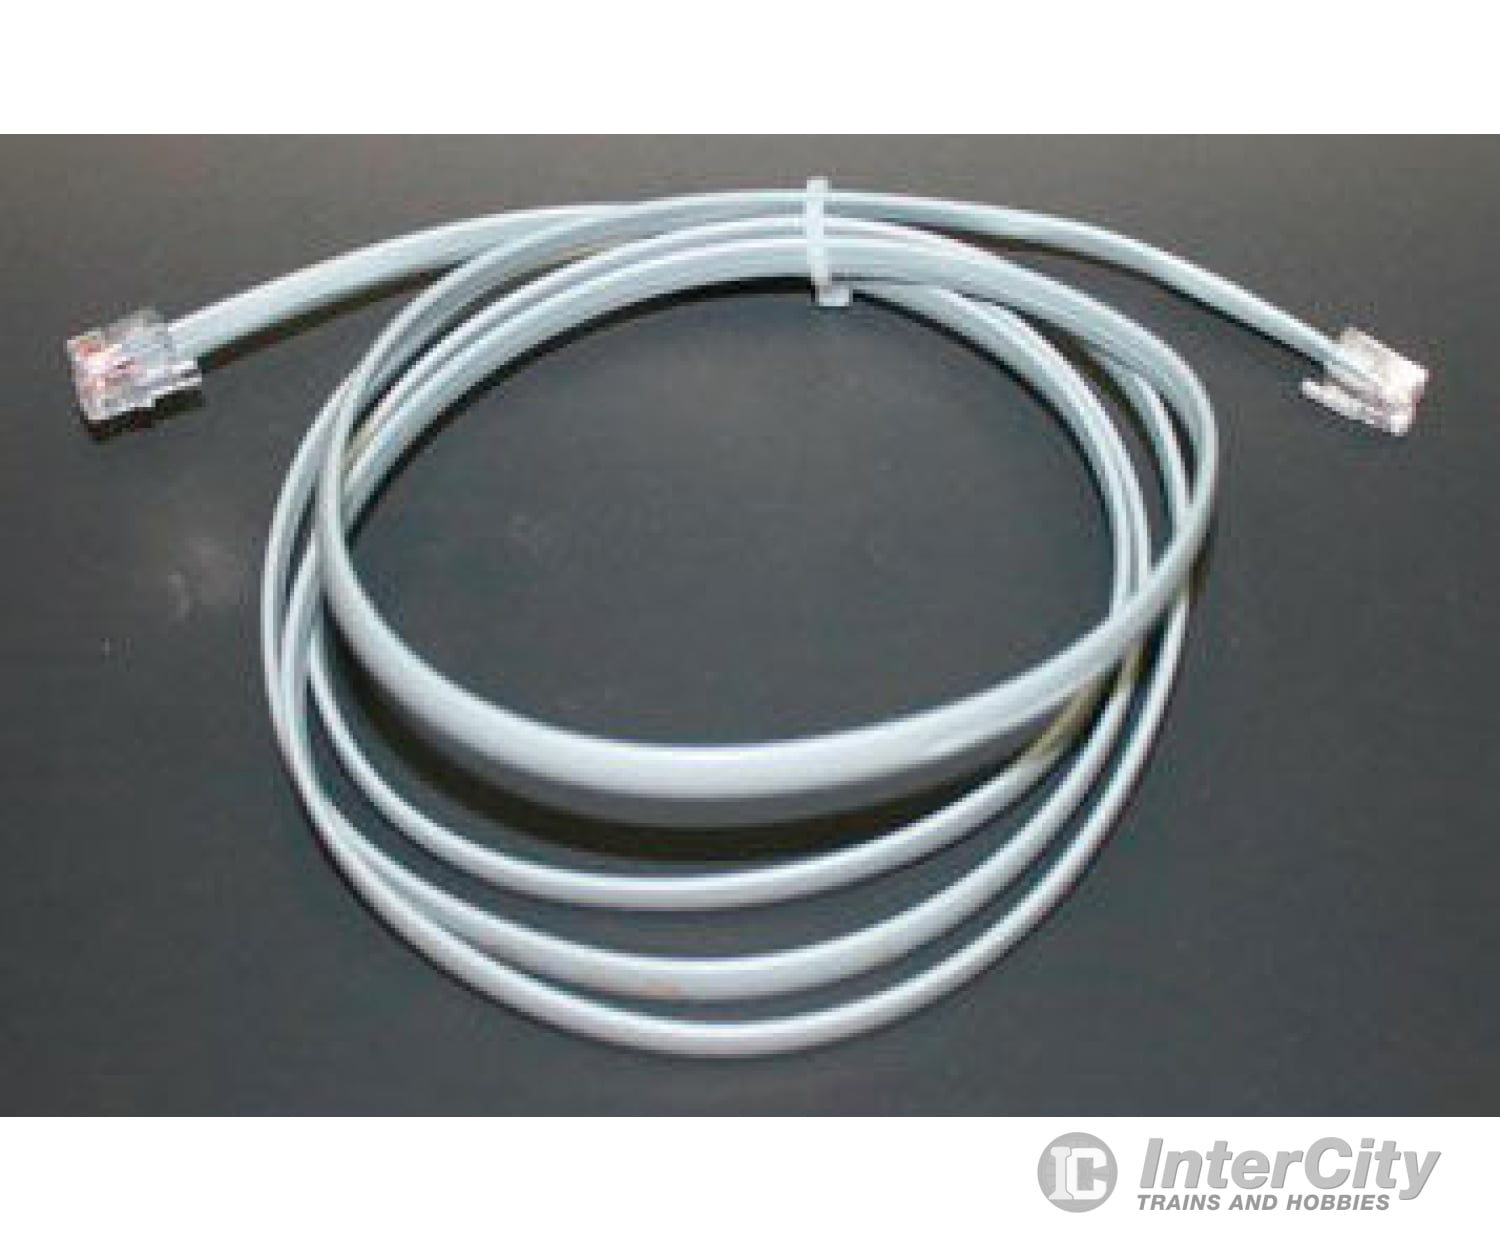 Accu Lites A 2005 Loconet/Nce Cable - - 5’ 1.5M Dcc Accessories